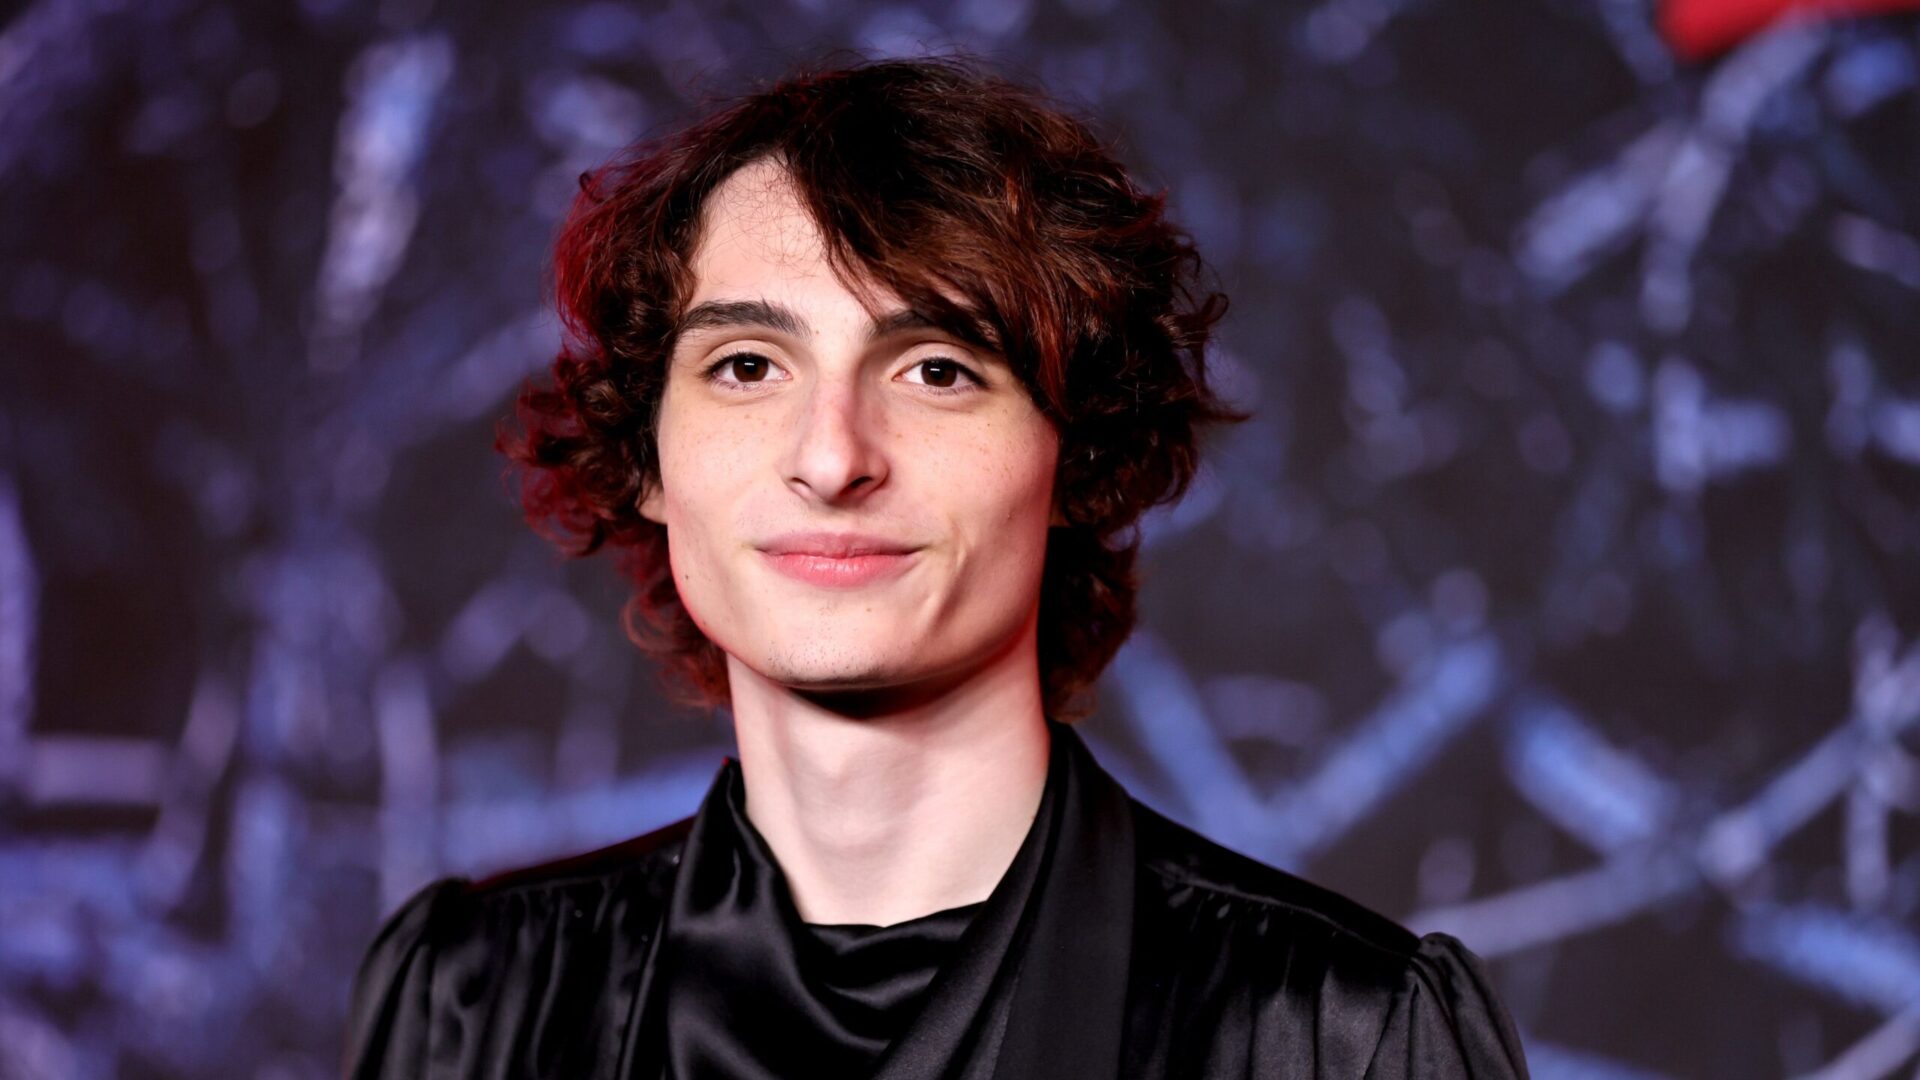 Finn Wolfhard Biography: Age, Movies, TV Shows, Height, Net Worth, Parents, Instagram, Relationship, Wiki